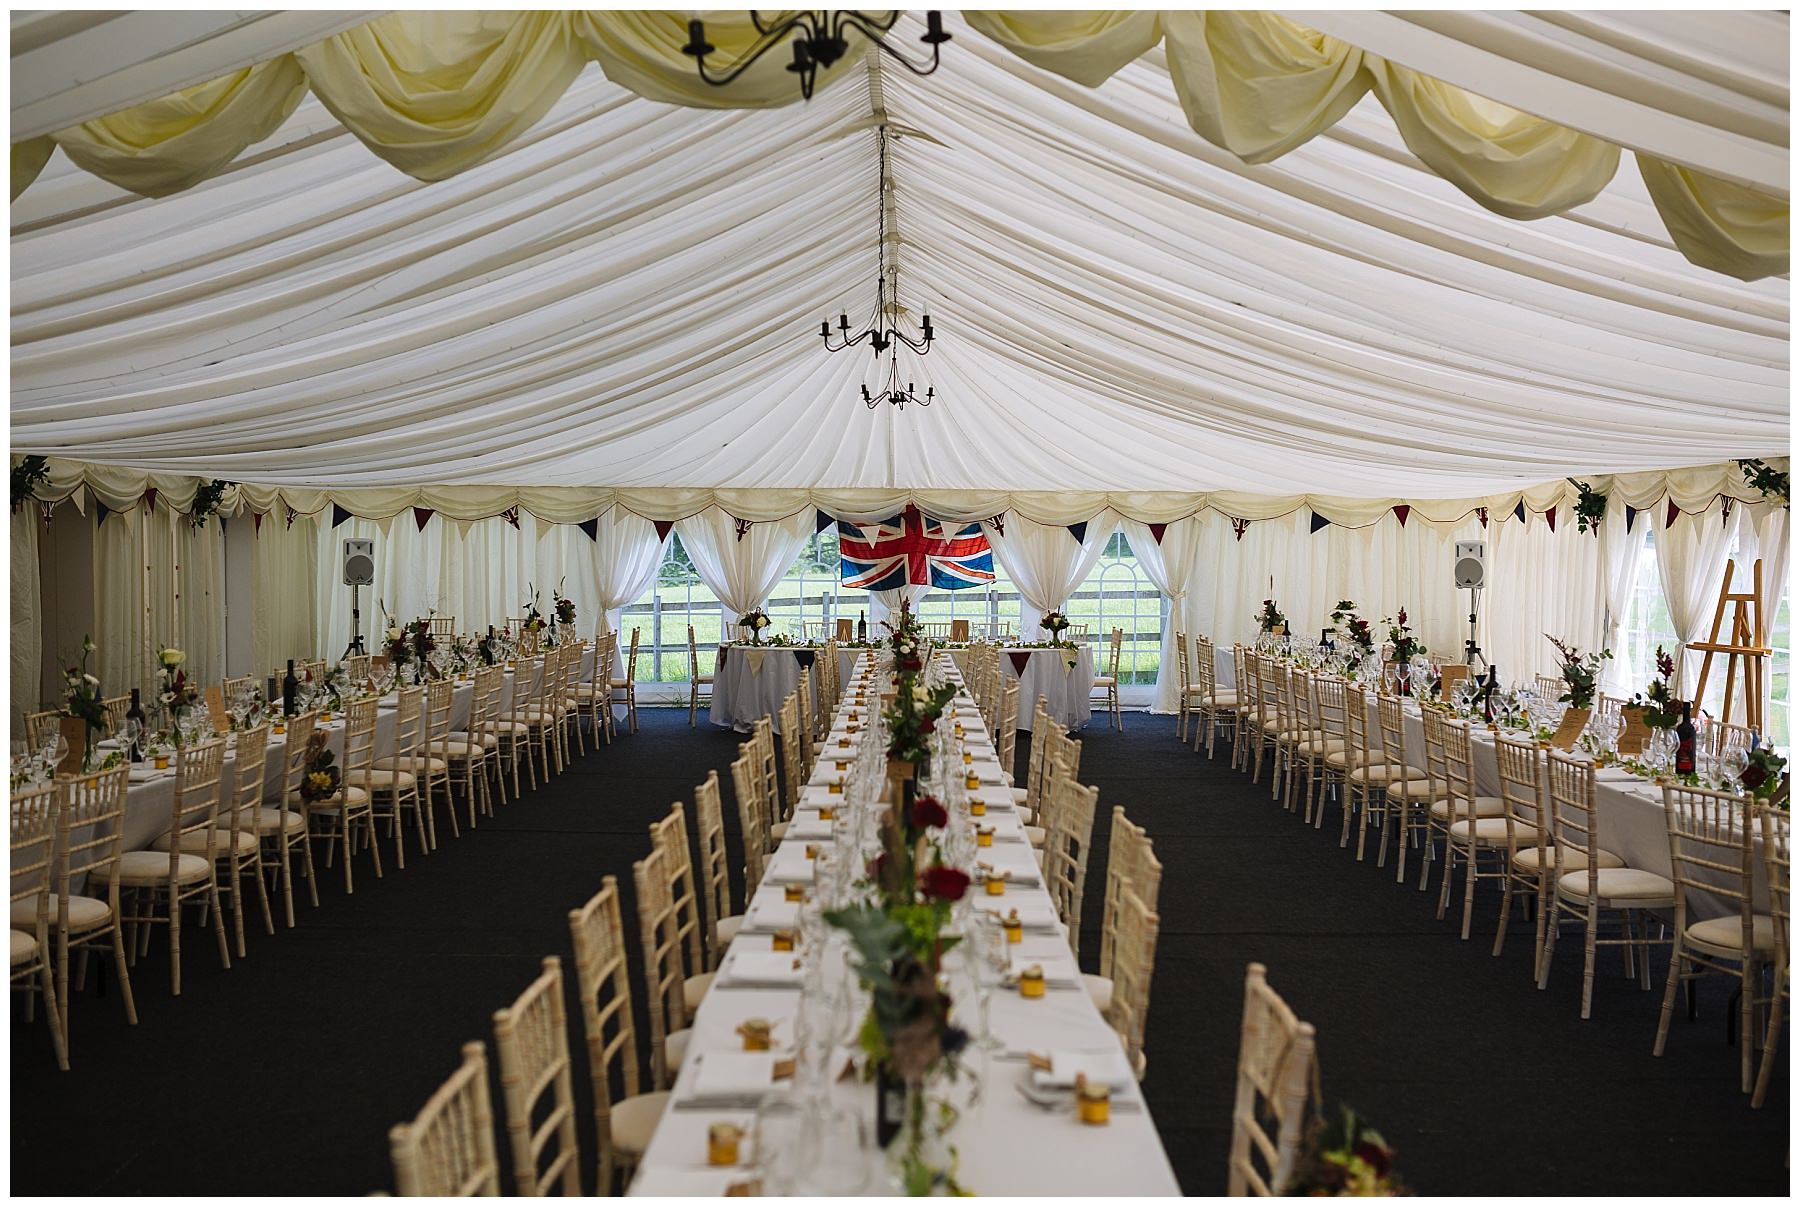 Hilltop House Marquee set out for informal wedding breakfast